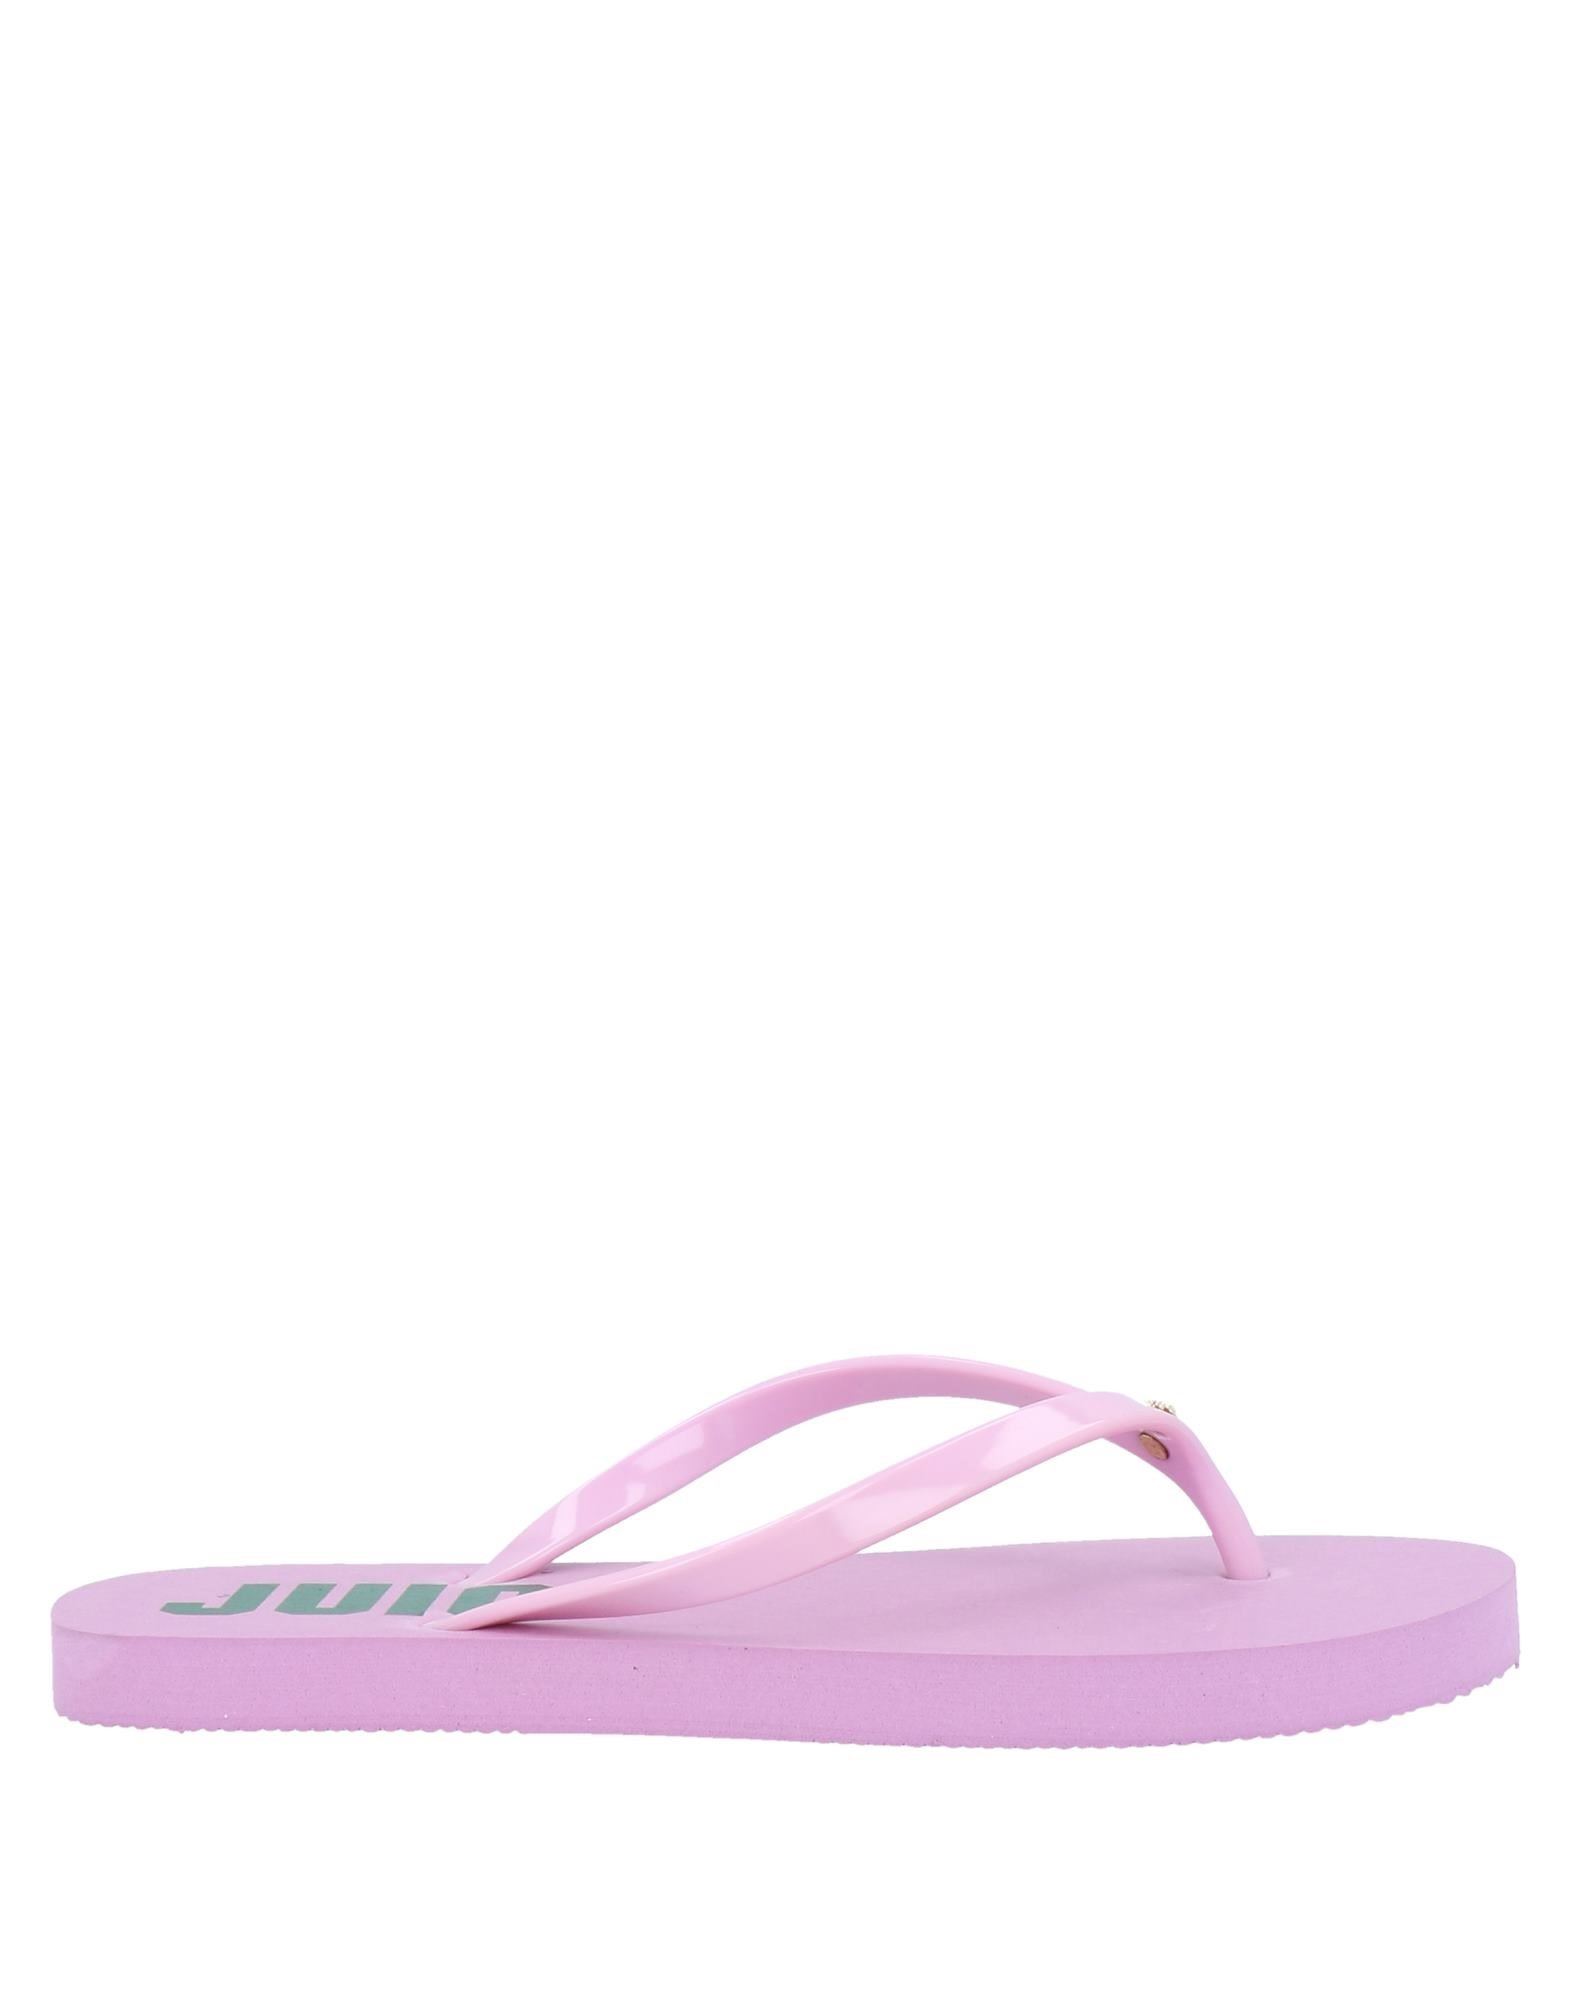 Juicy Couture Toe Strap Sandals In Lilac